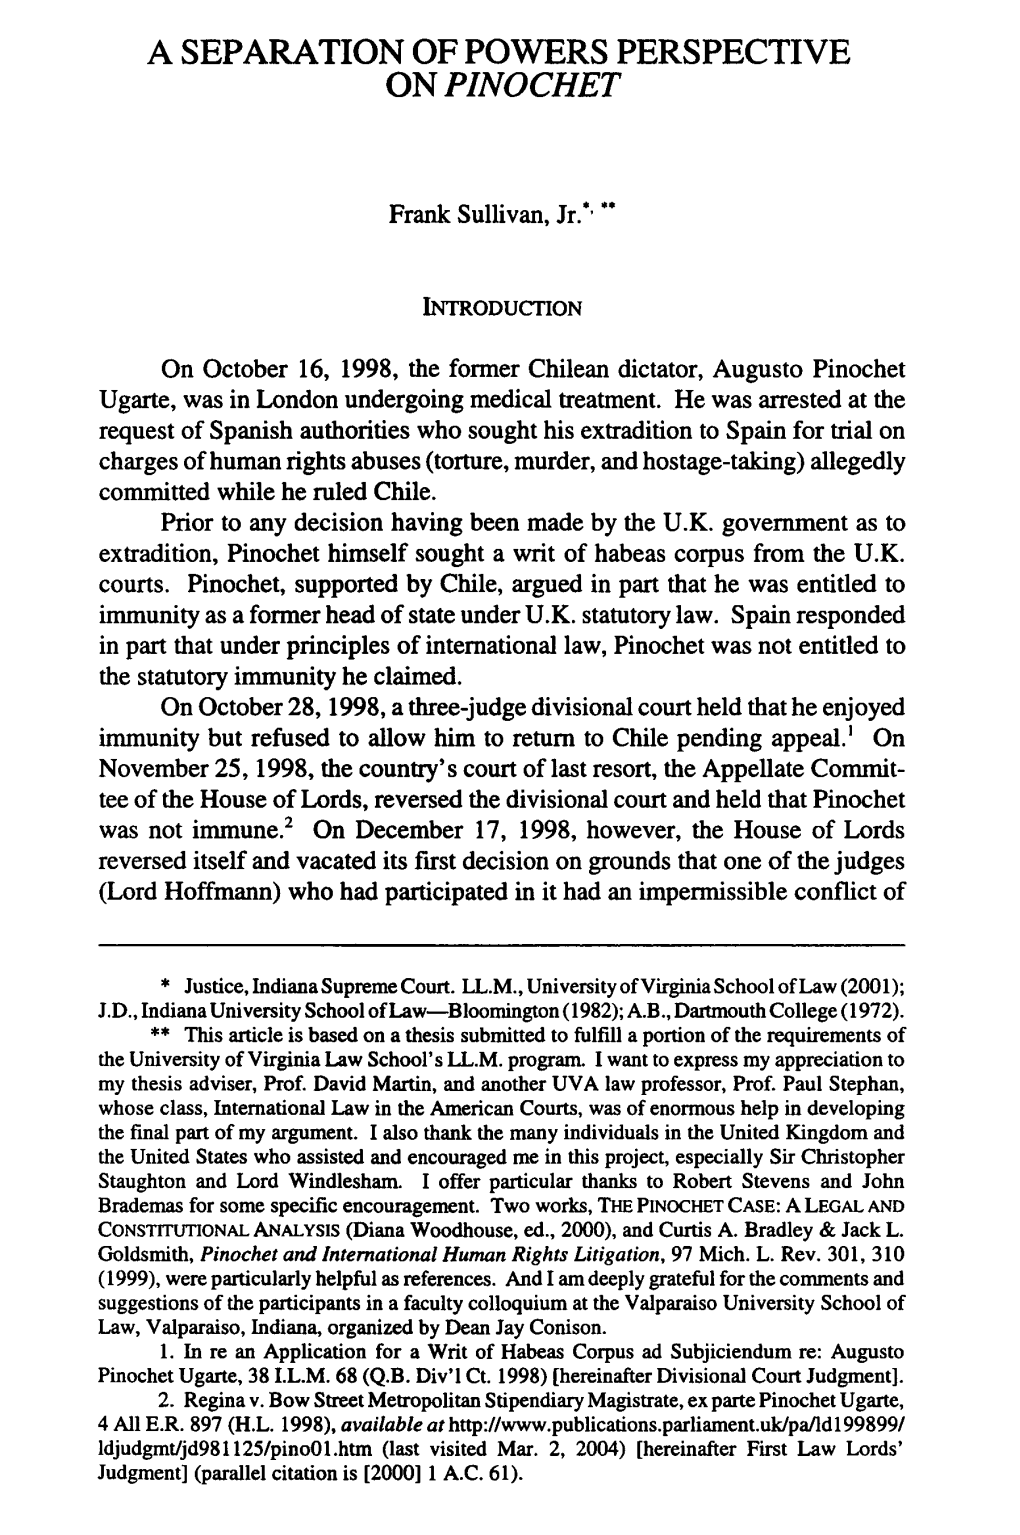 Separation of Powers Perspective on Pinochet, A